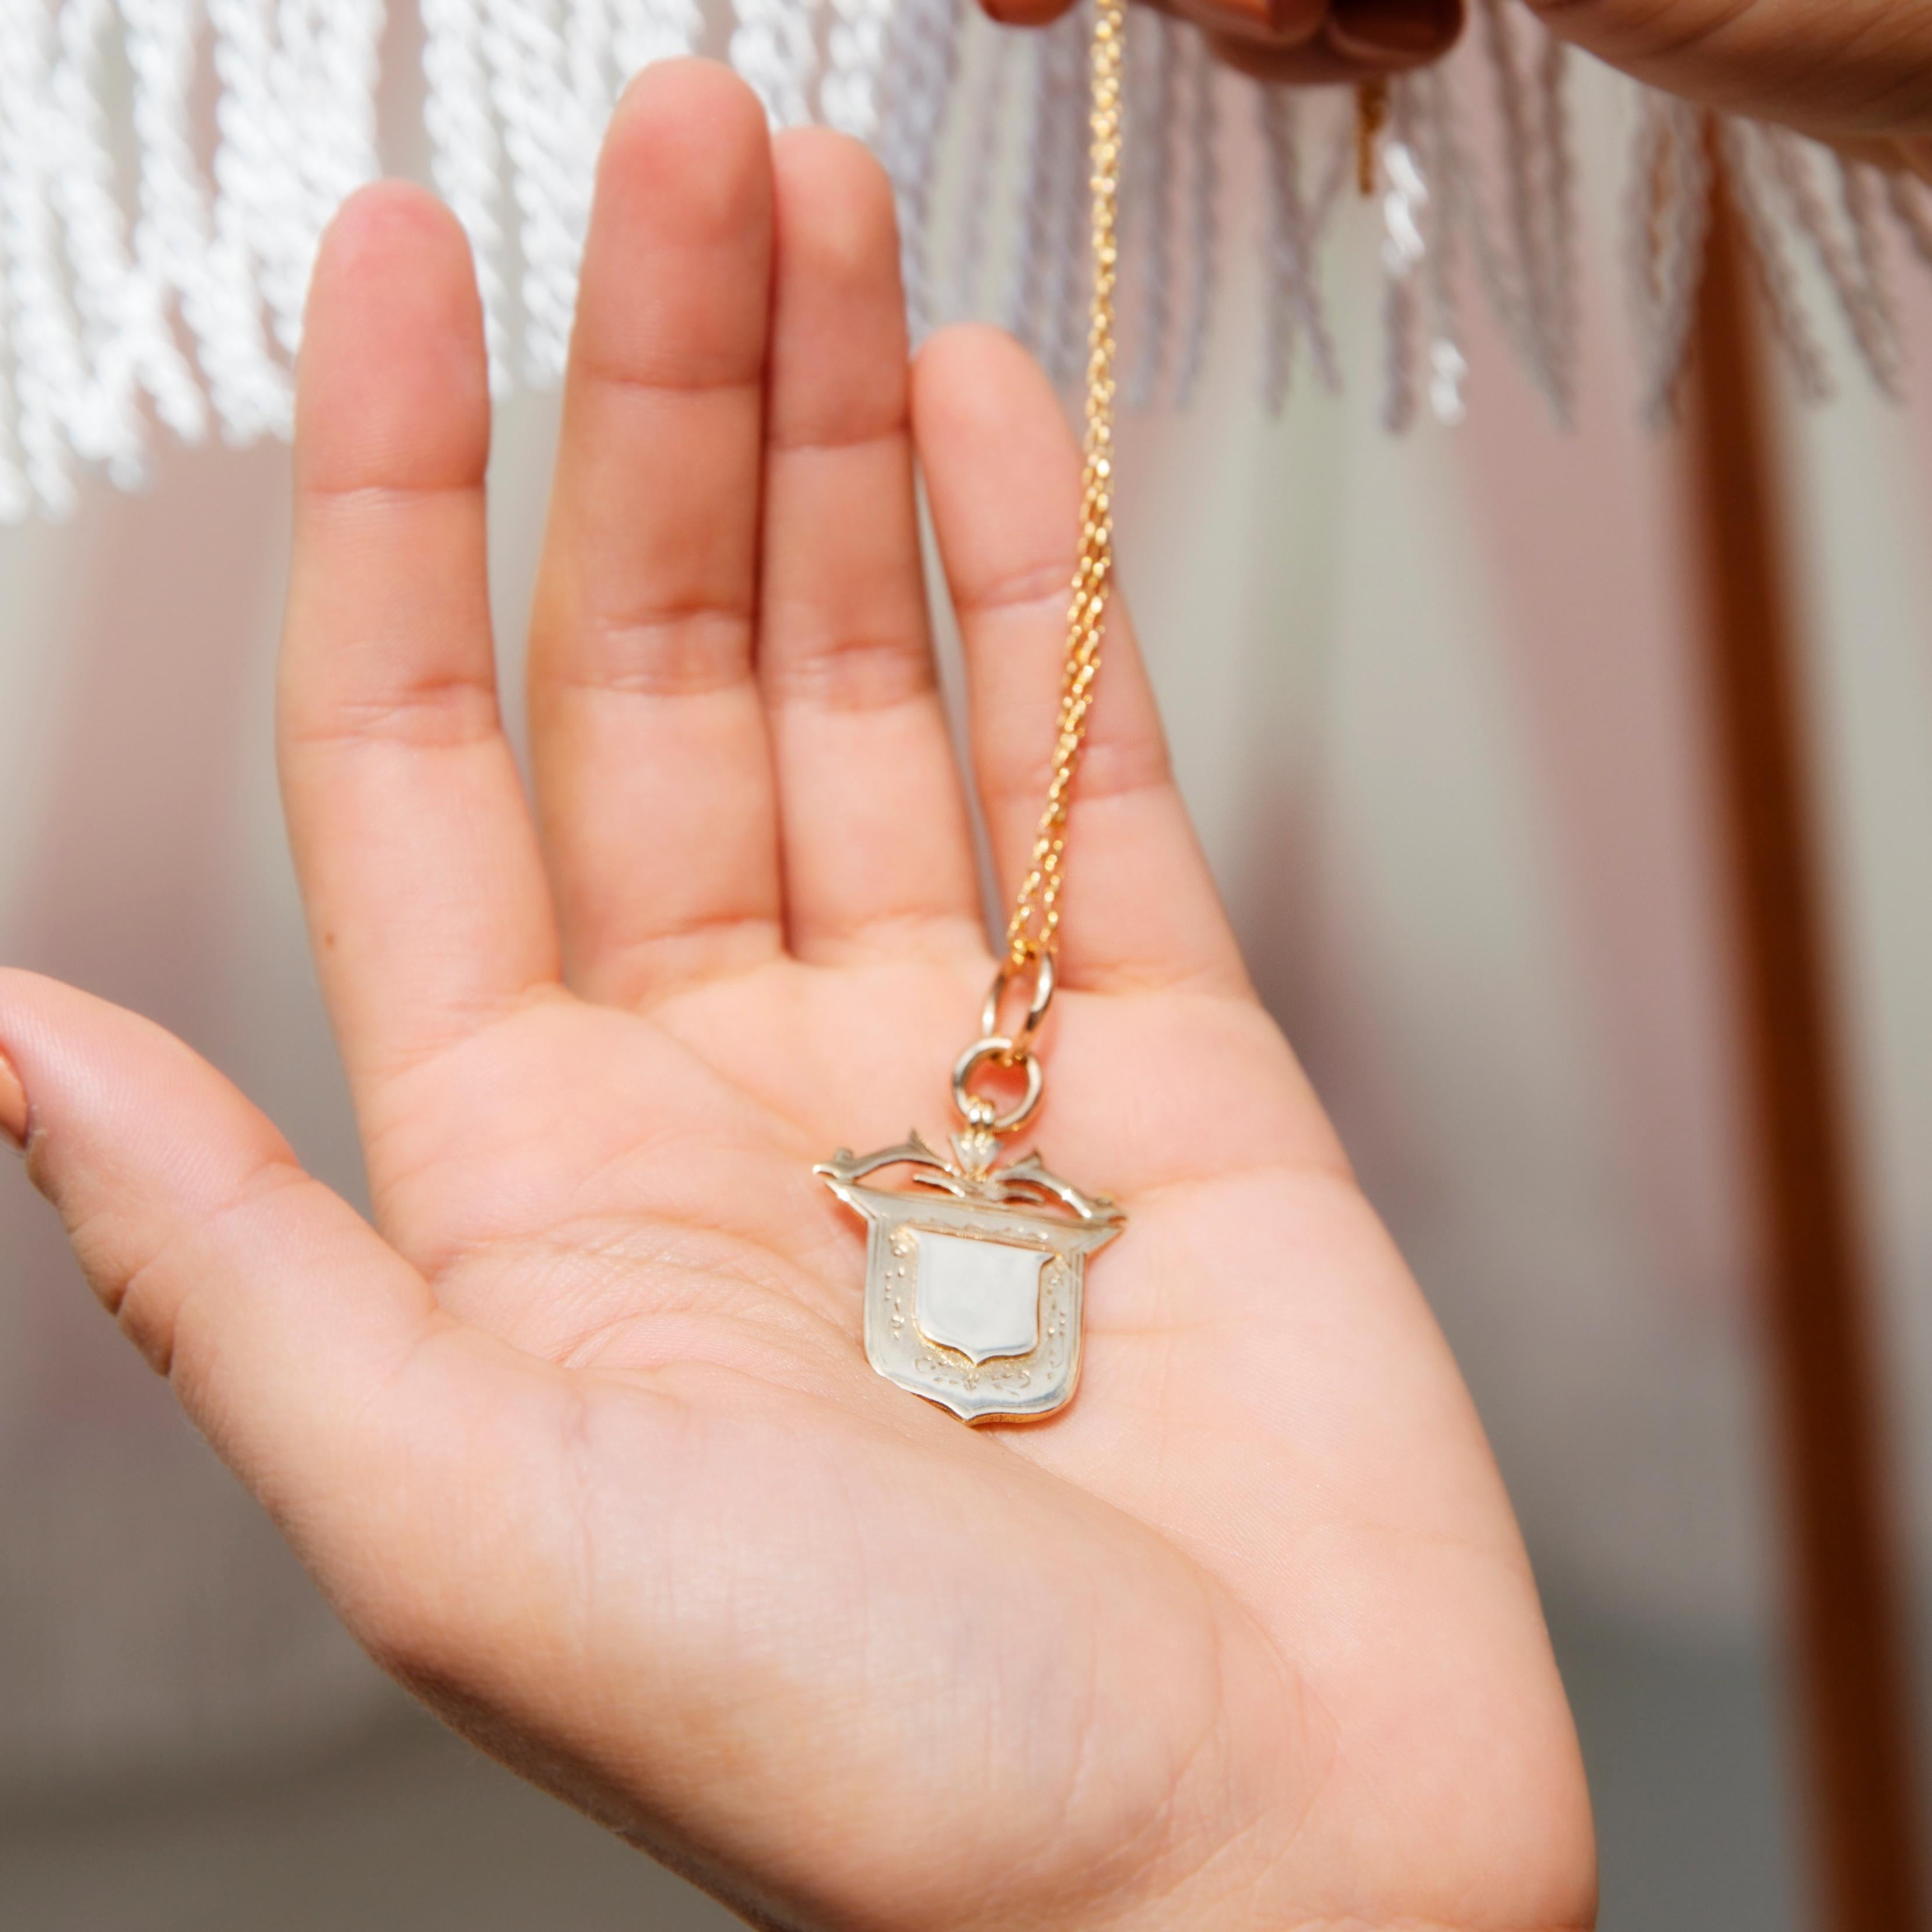 Crafted in 9 carat yellow gold, this charming vintage antique pendant features a central shield motif on a shield-shaped platform, evoking feelings of peace and protection. The Mawlsley Pendant is comfortably worn below the neck and against the